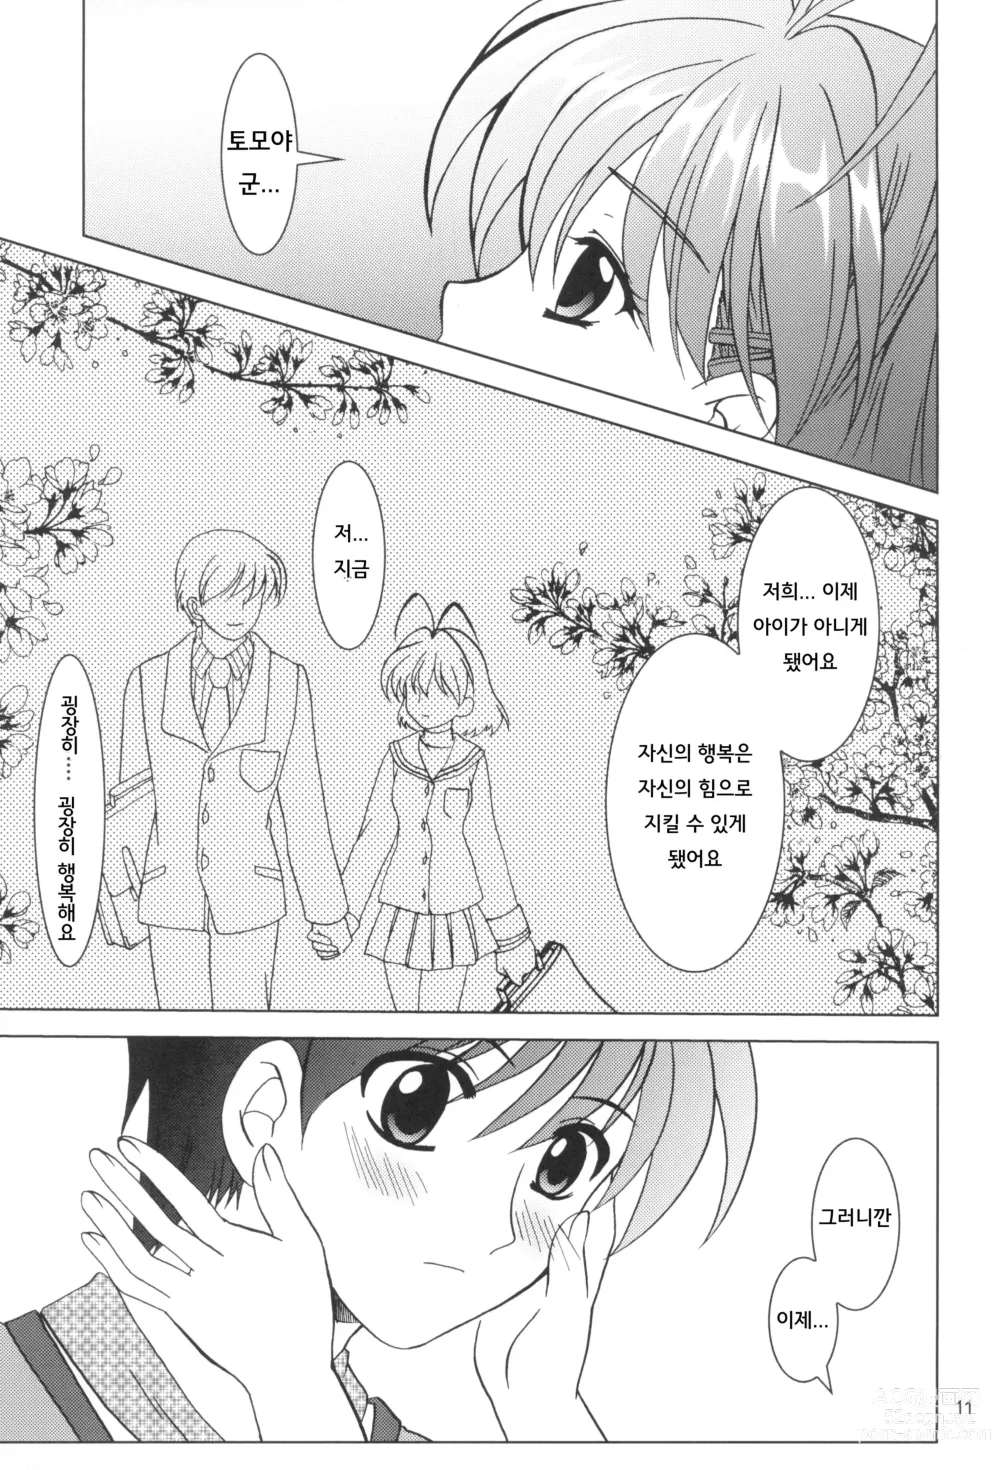 Page 10 of doujinshi 카노니즘 17